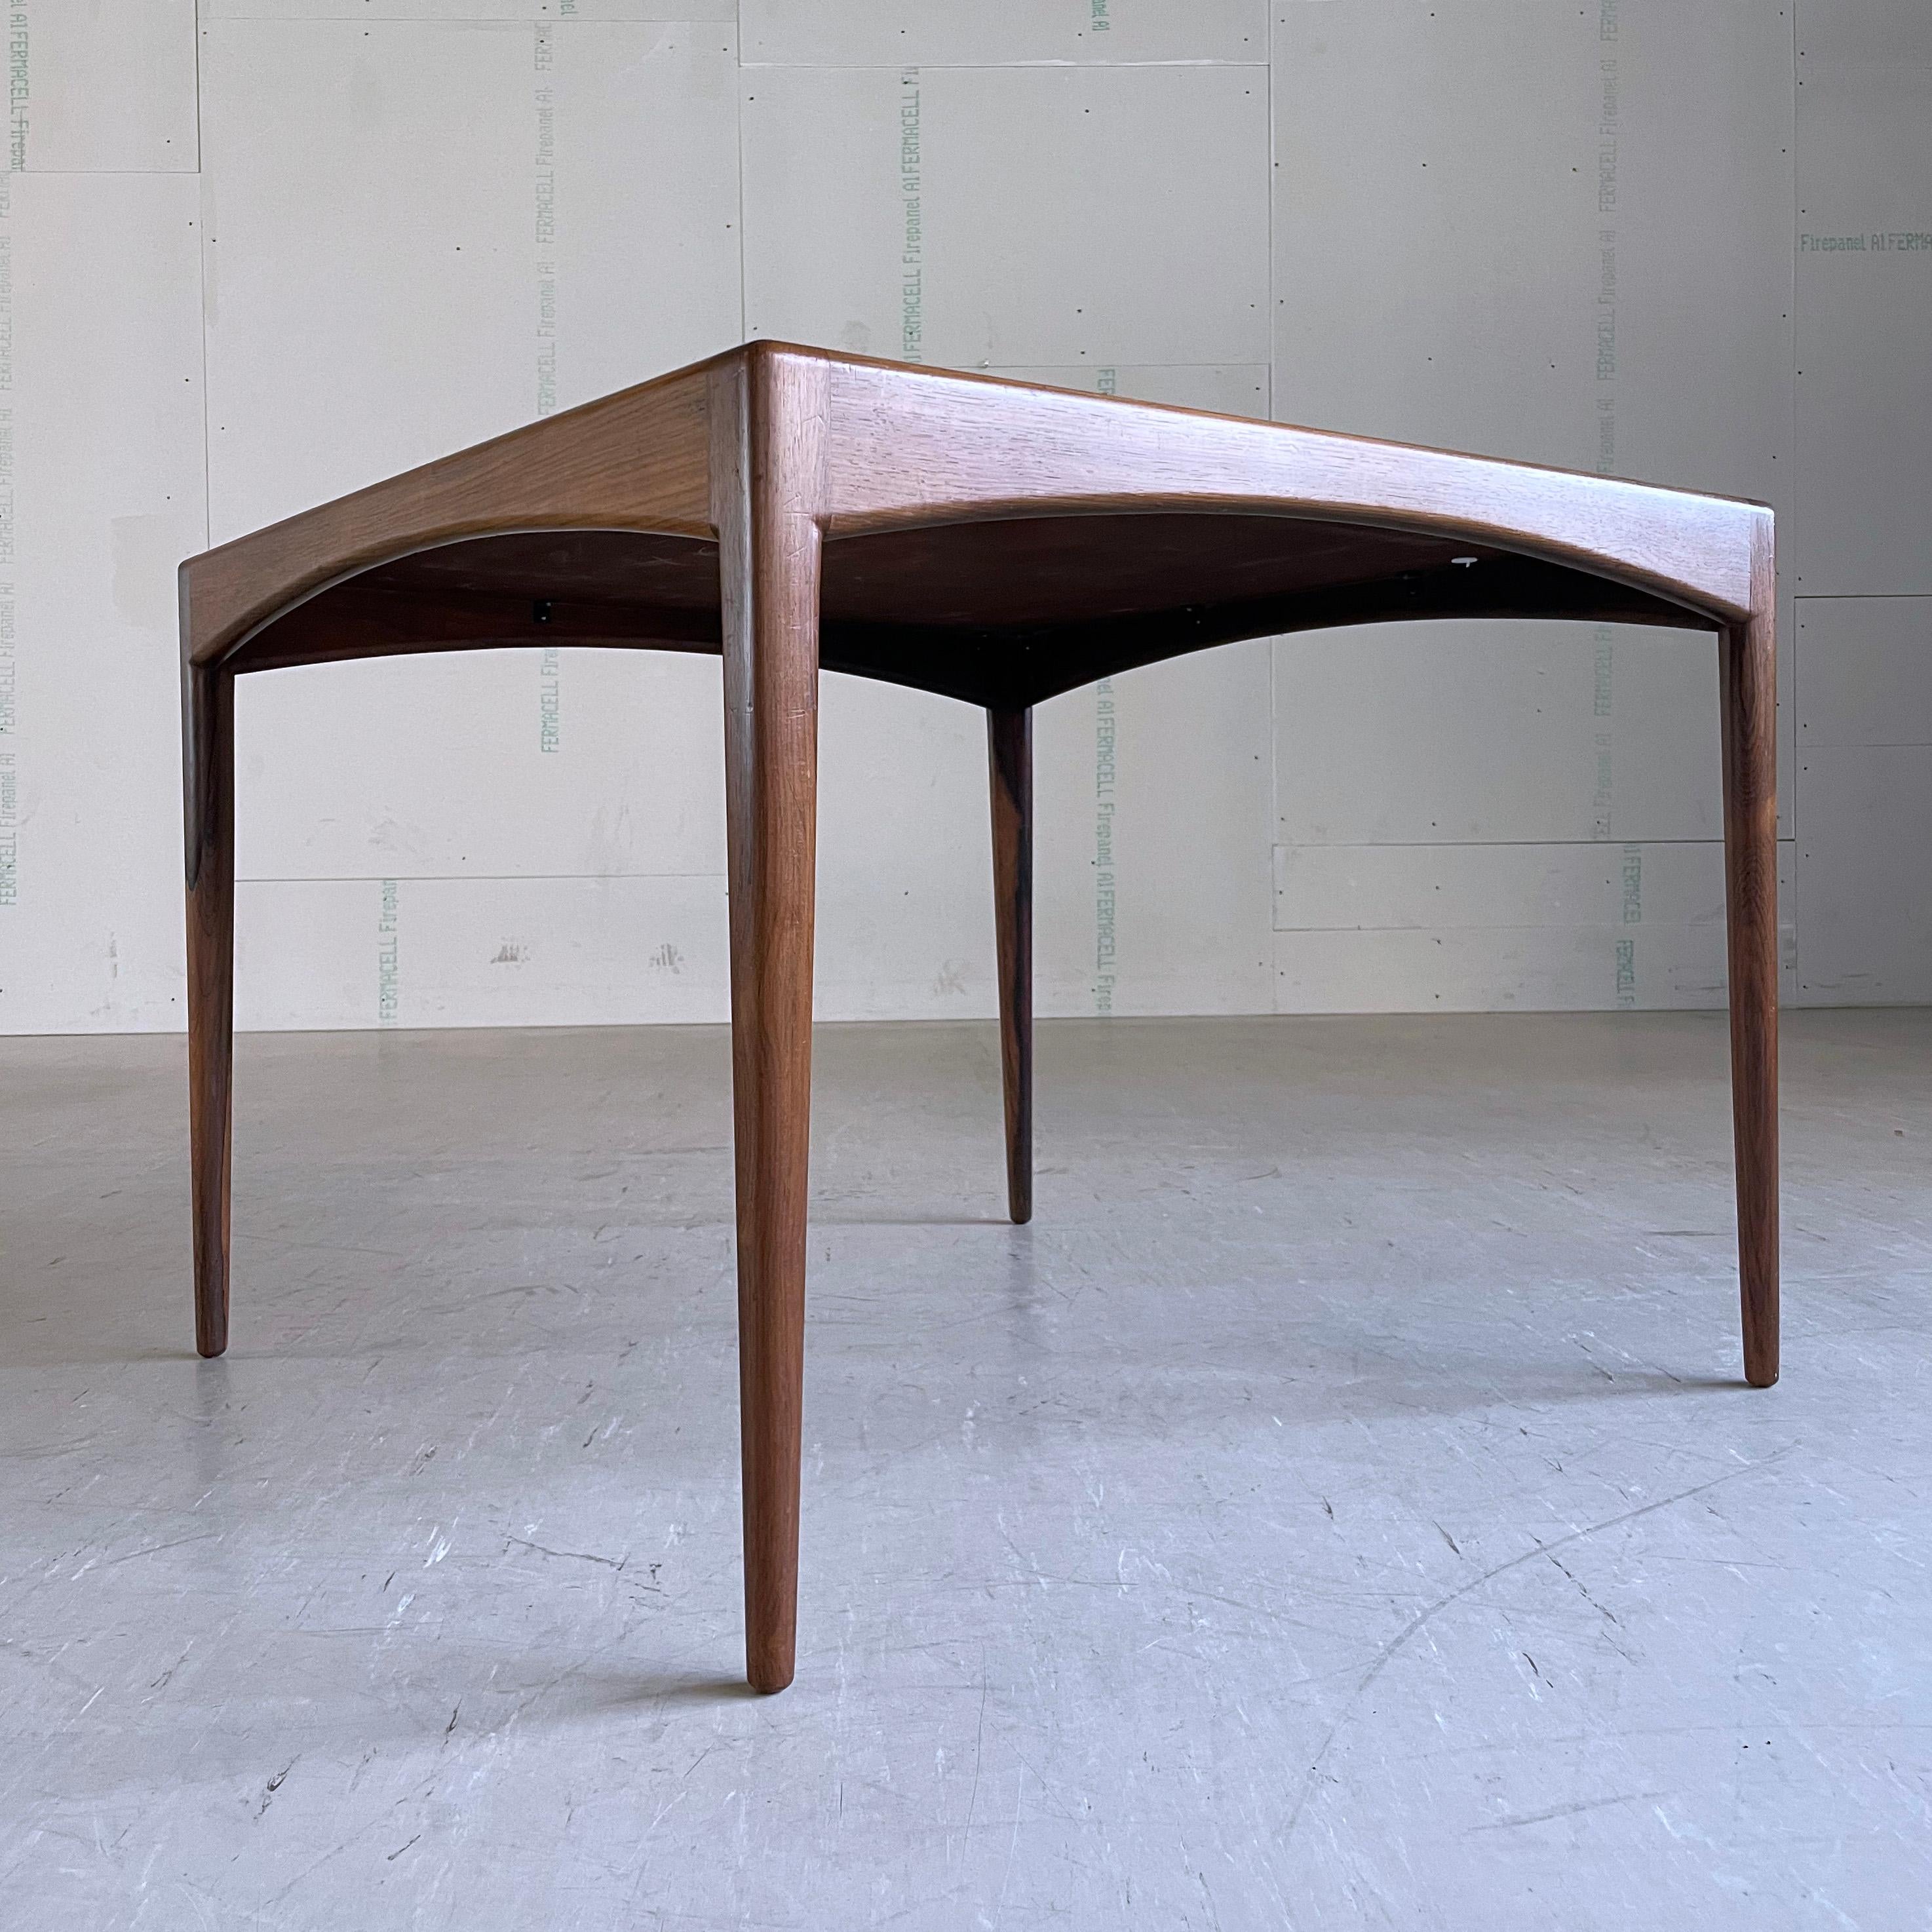 Kristian Solmer Vedel Rosewood Dining Table. Produced by Søren Willadsen, Denmark. Beautiful wood grain and in fantastic condition
Designer: Kristian Sommer Vedel
Producer:  Søren Willadsen, Denmark 1963
Measurements: Height: 66 cm  Width: 90cm 